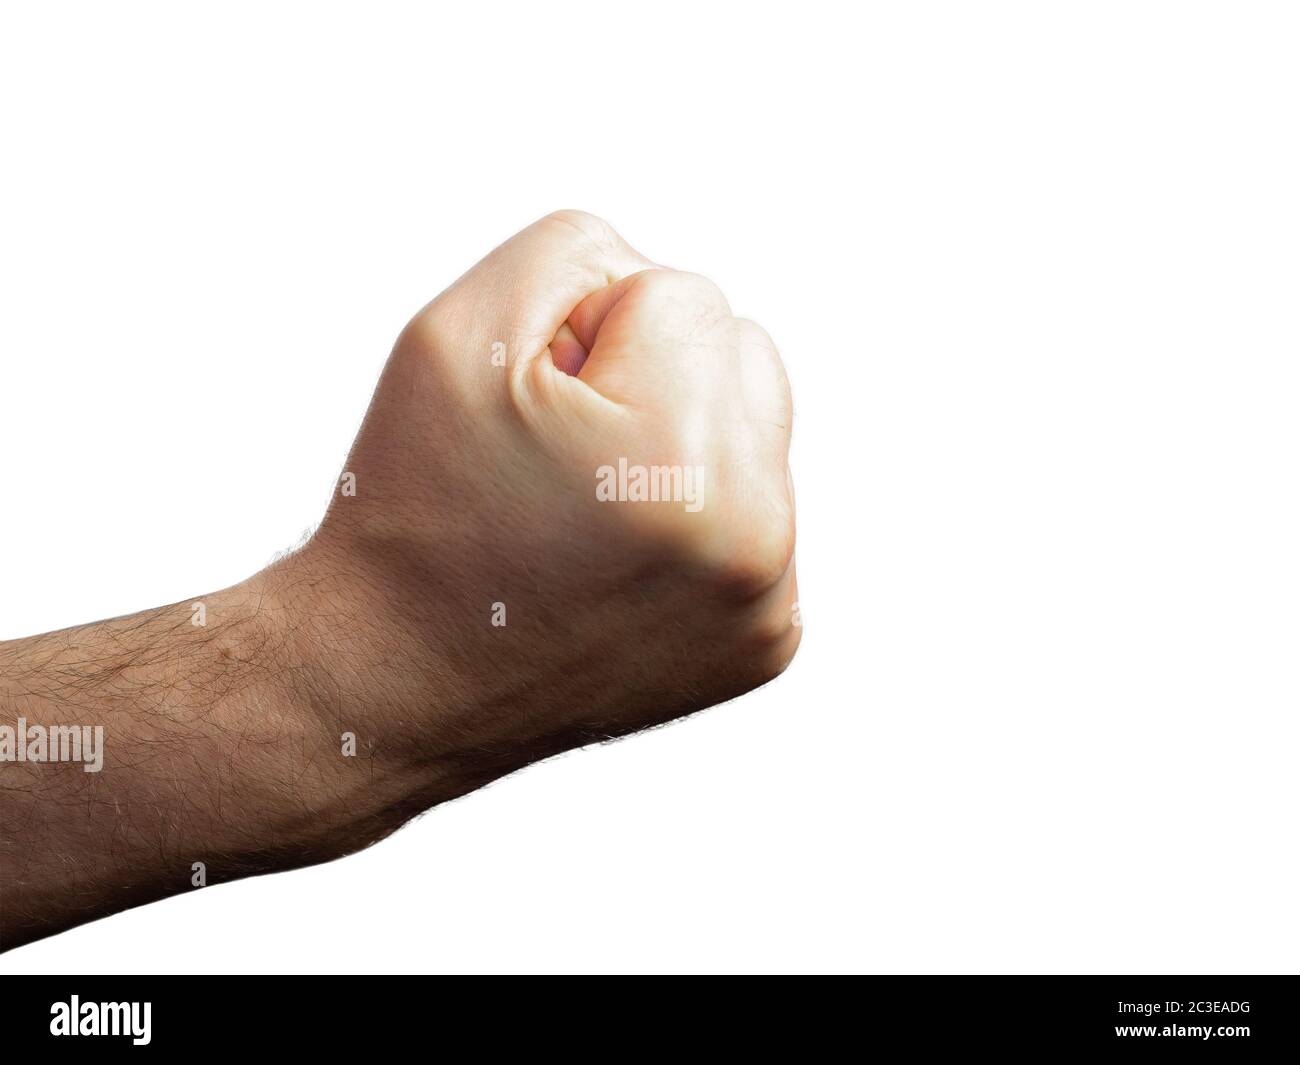 Male brutal hairy hand clenched into a fist on an isolated background Stock Photo